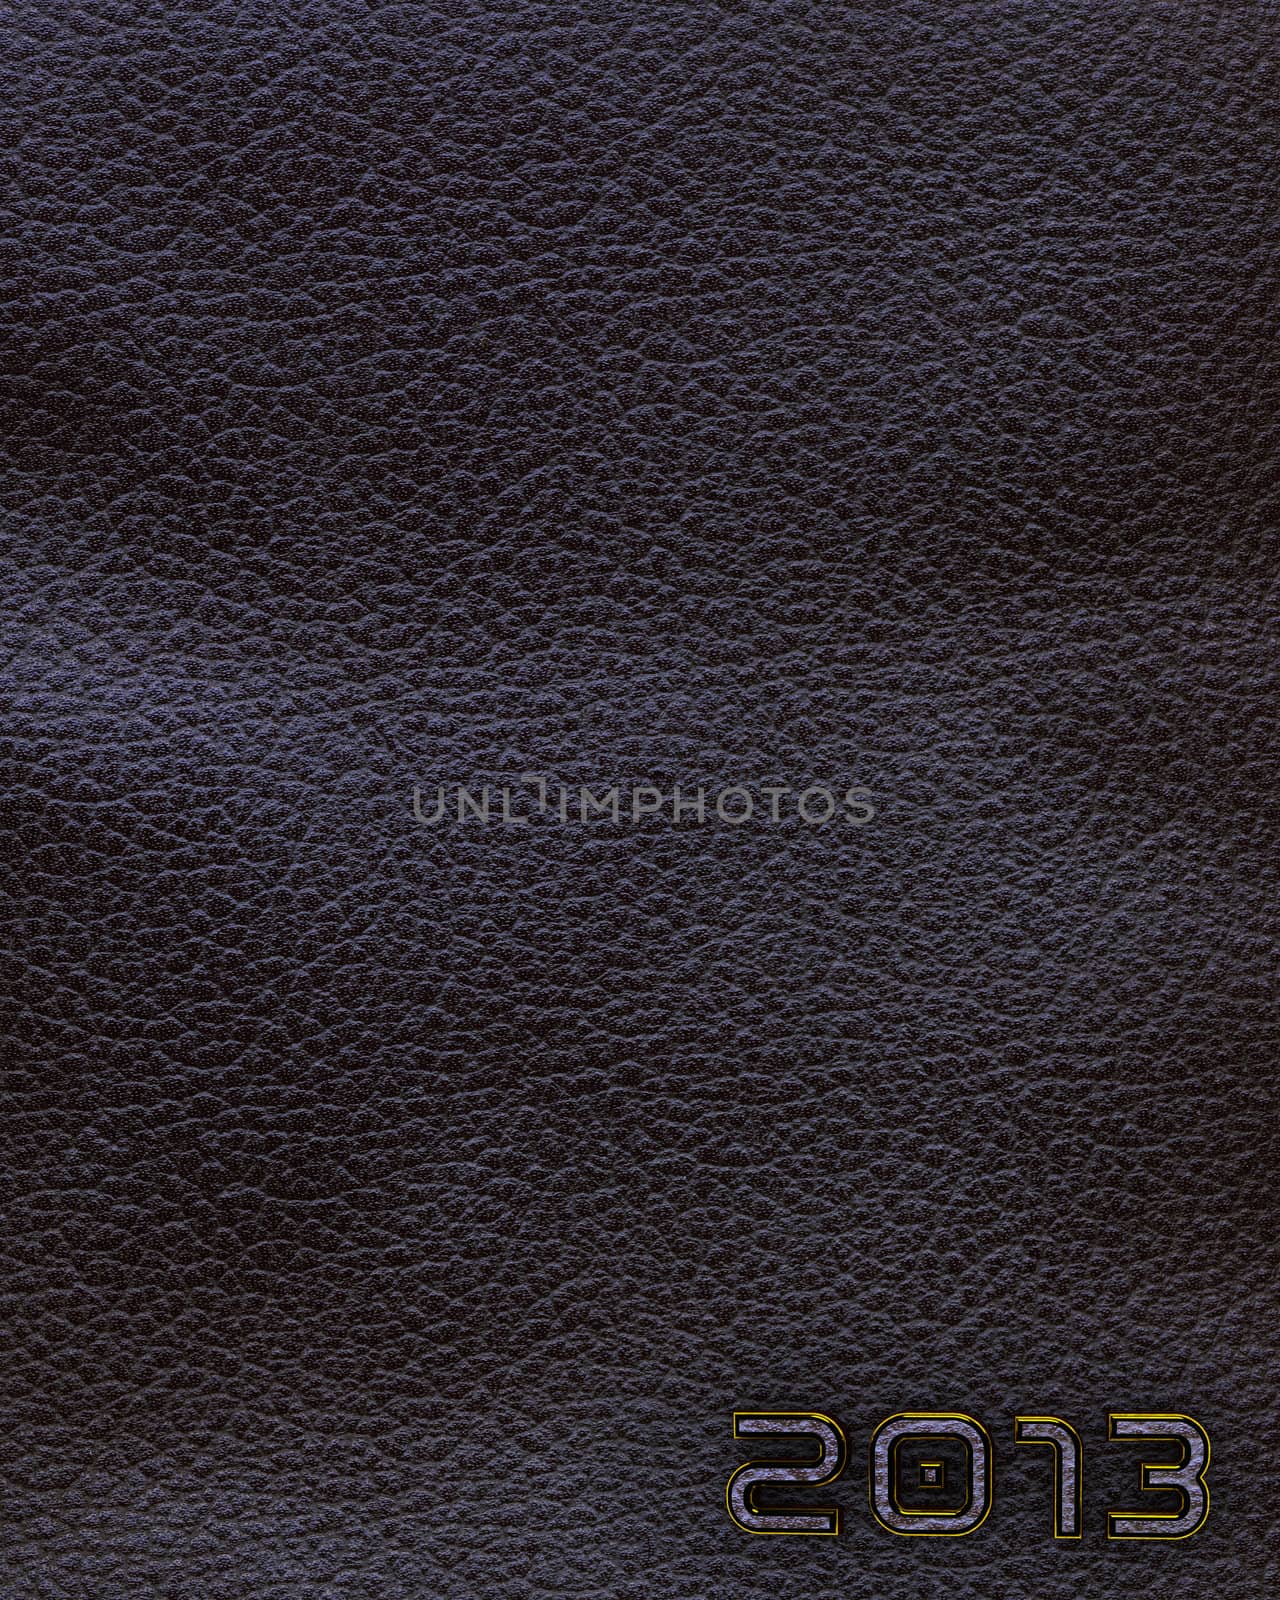 Leather background with 2013 new year label. Vertical orientation. Black.